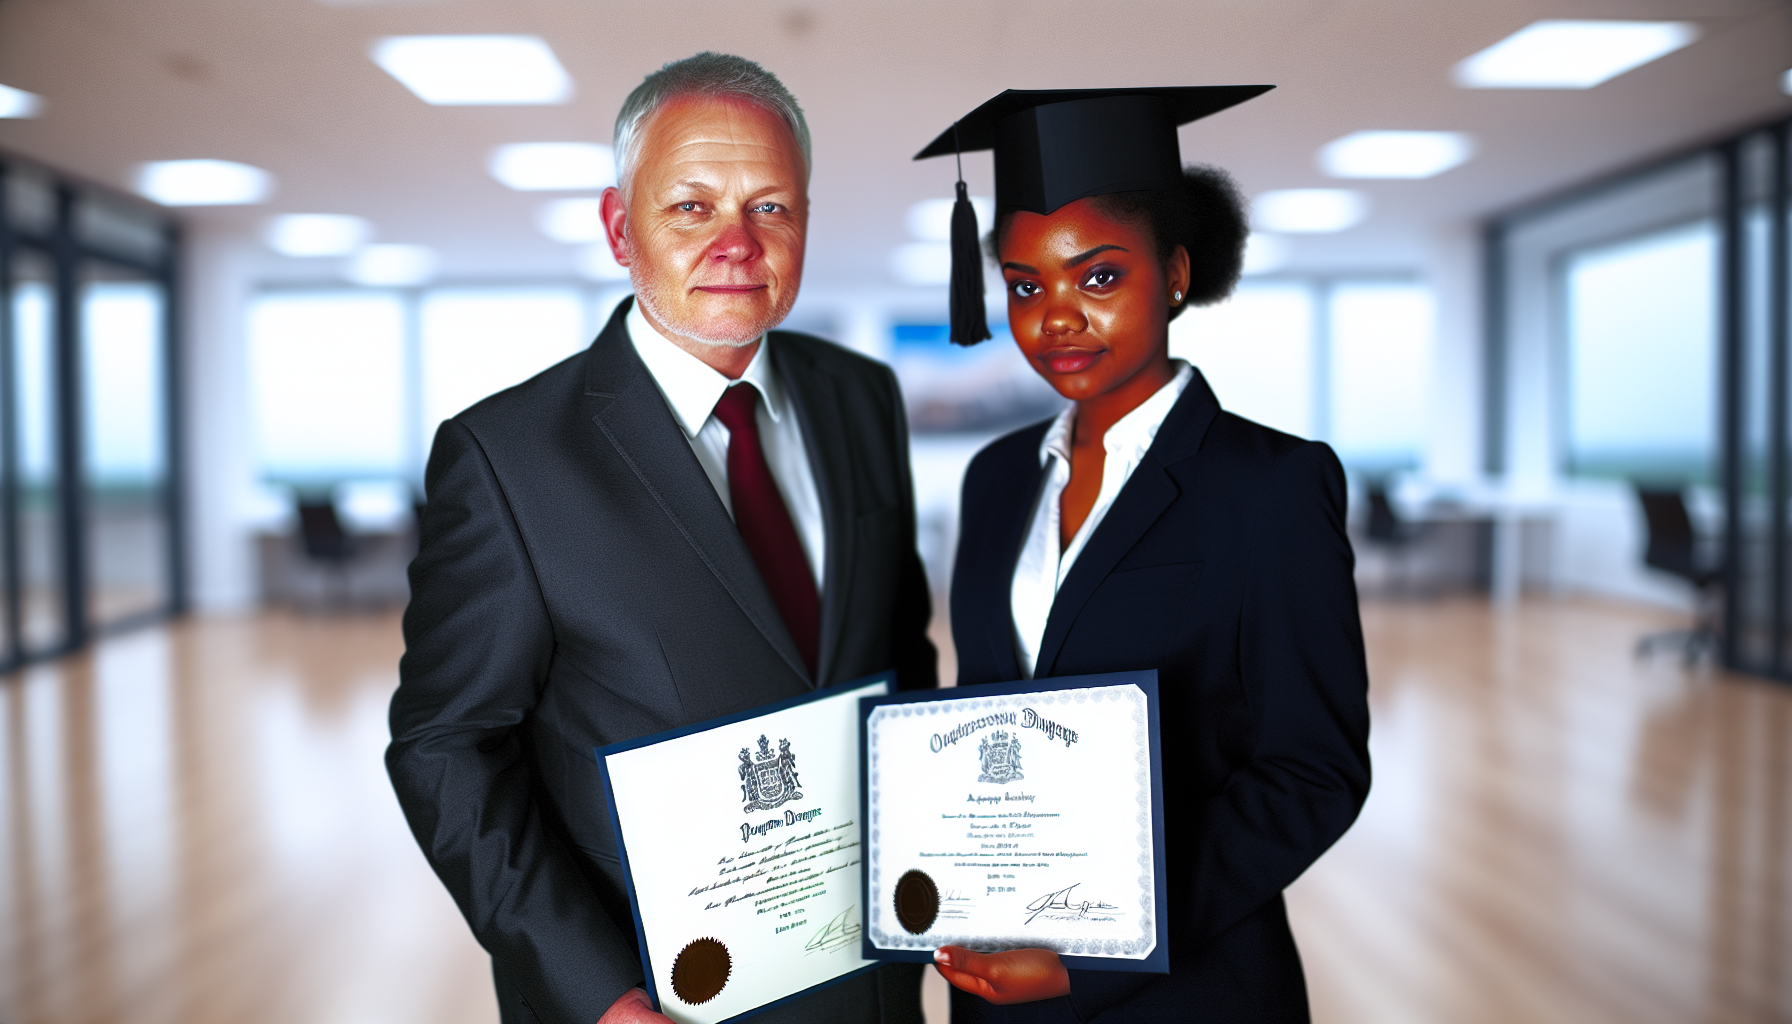 Photo of a person with a bachelor's degree certificate